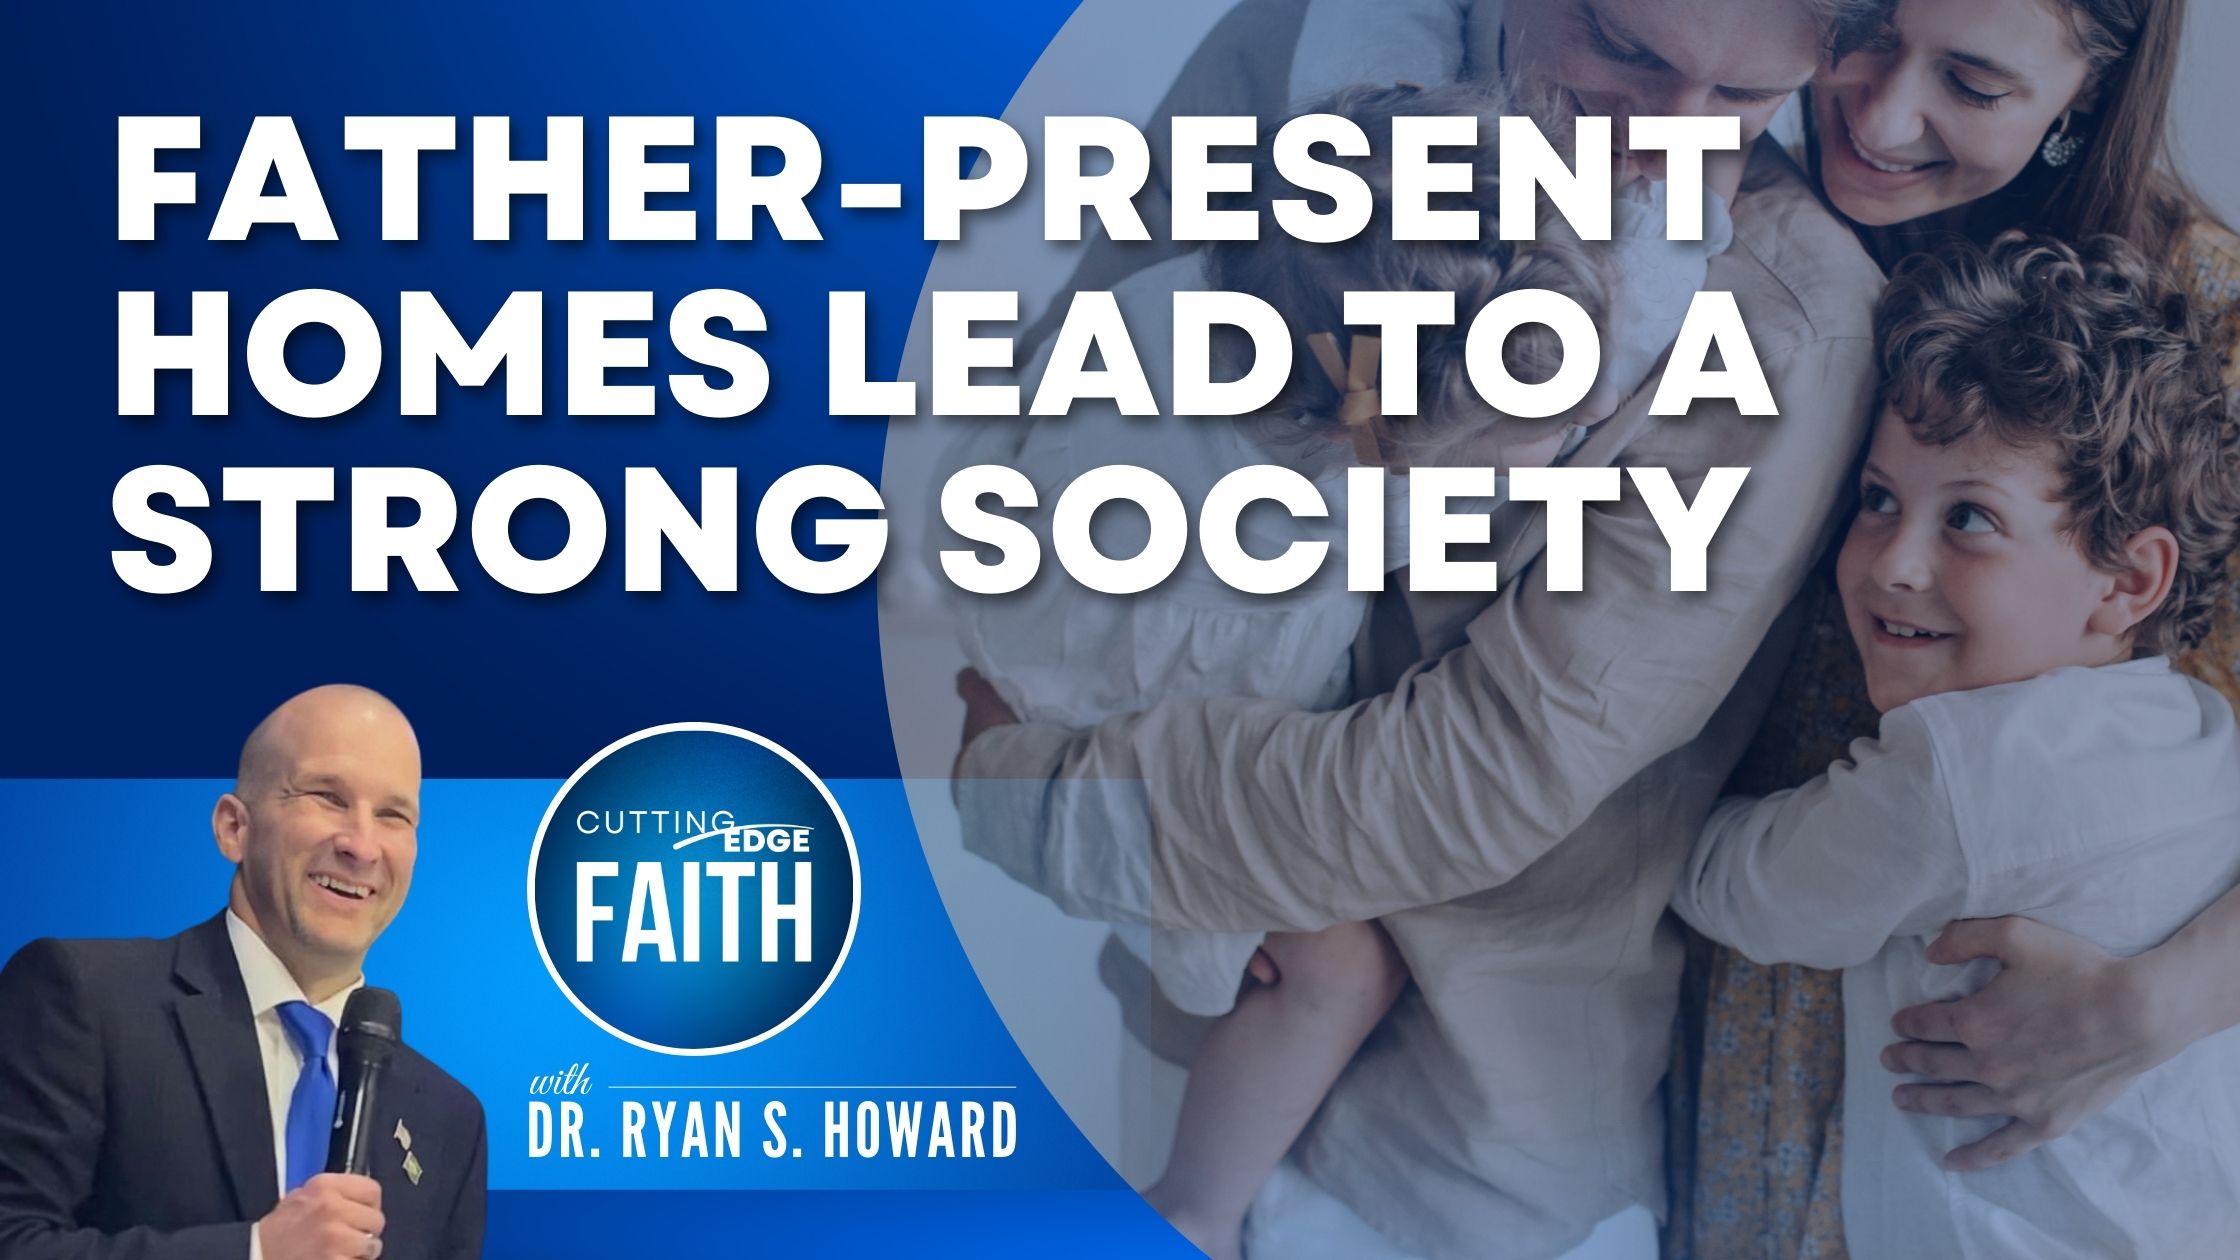 Father-present Homes Lead to a Strong Society - Ryan S. Howard